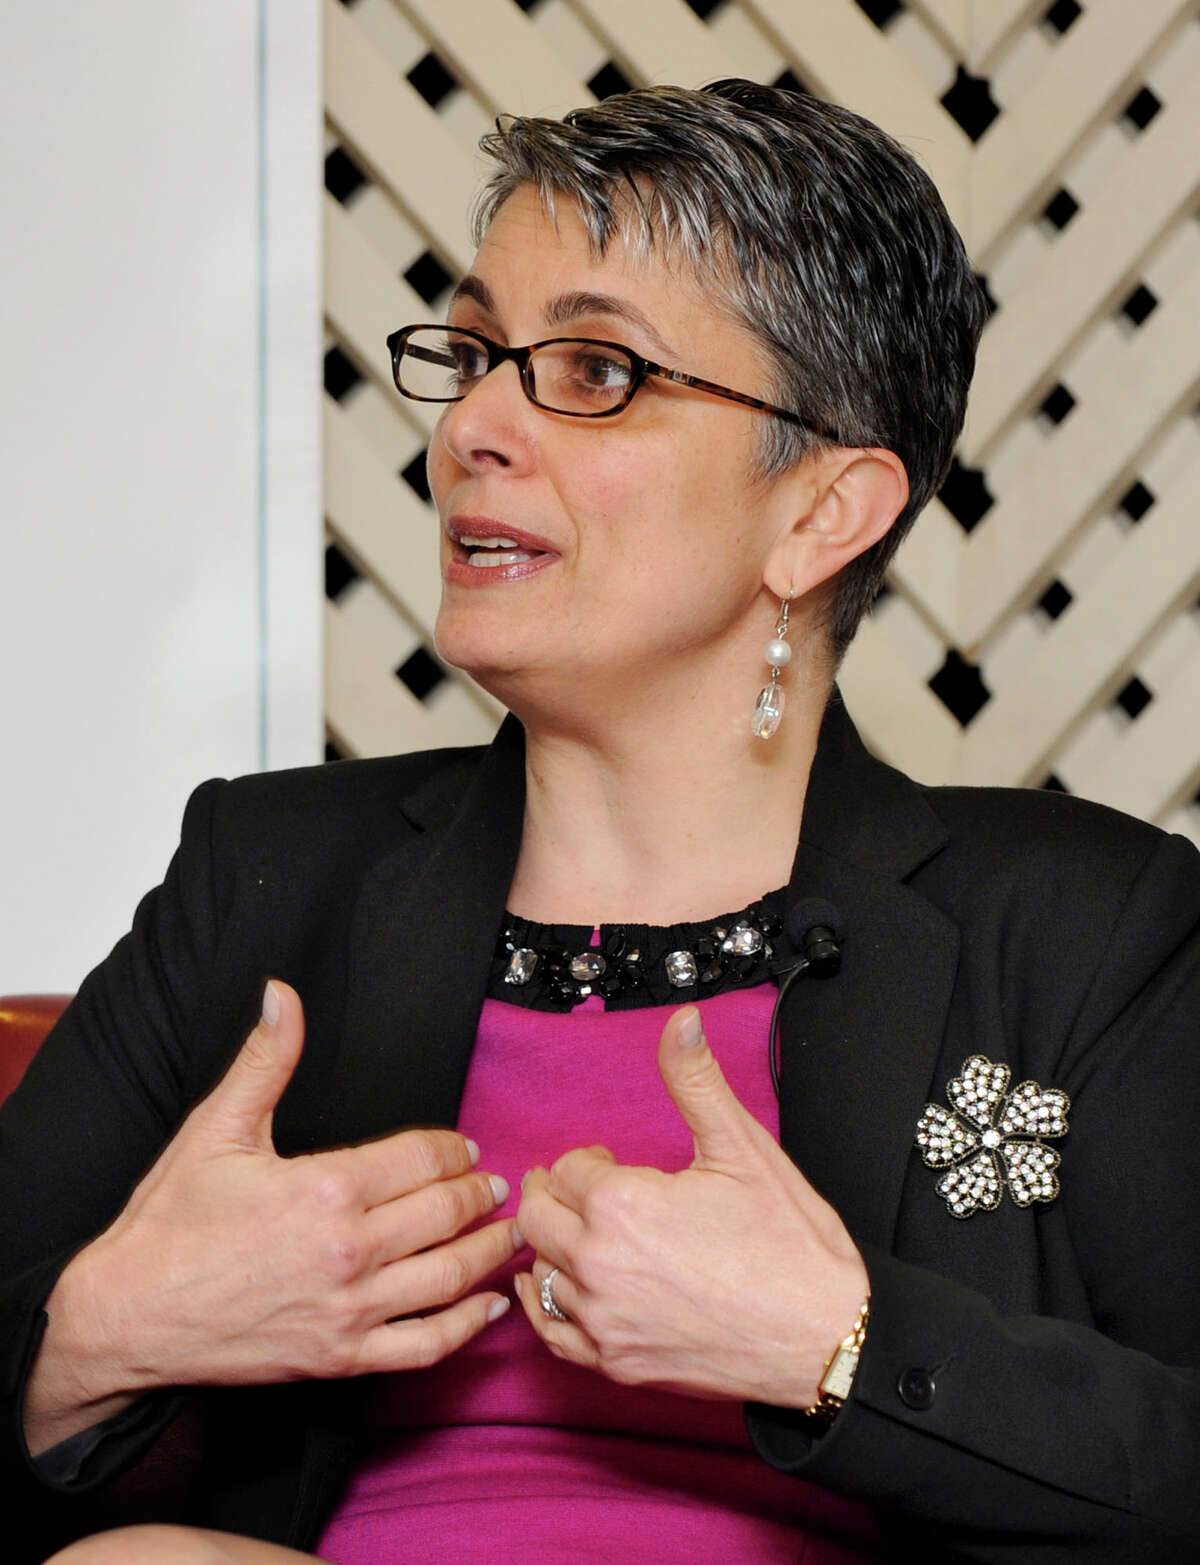 Fran Pastore speaks as part of a panel of for "Conversations with Extraordinary Women 2012," hosted by the Women's Business Council at The Matrix Center in Danbury on Thursday, April 26, 2012.